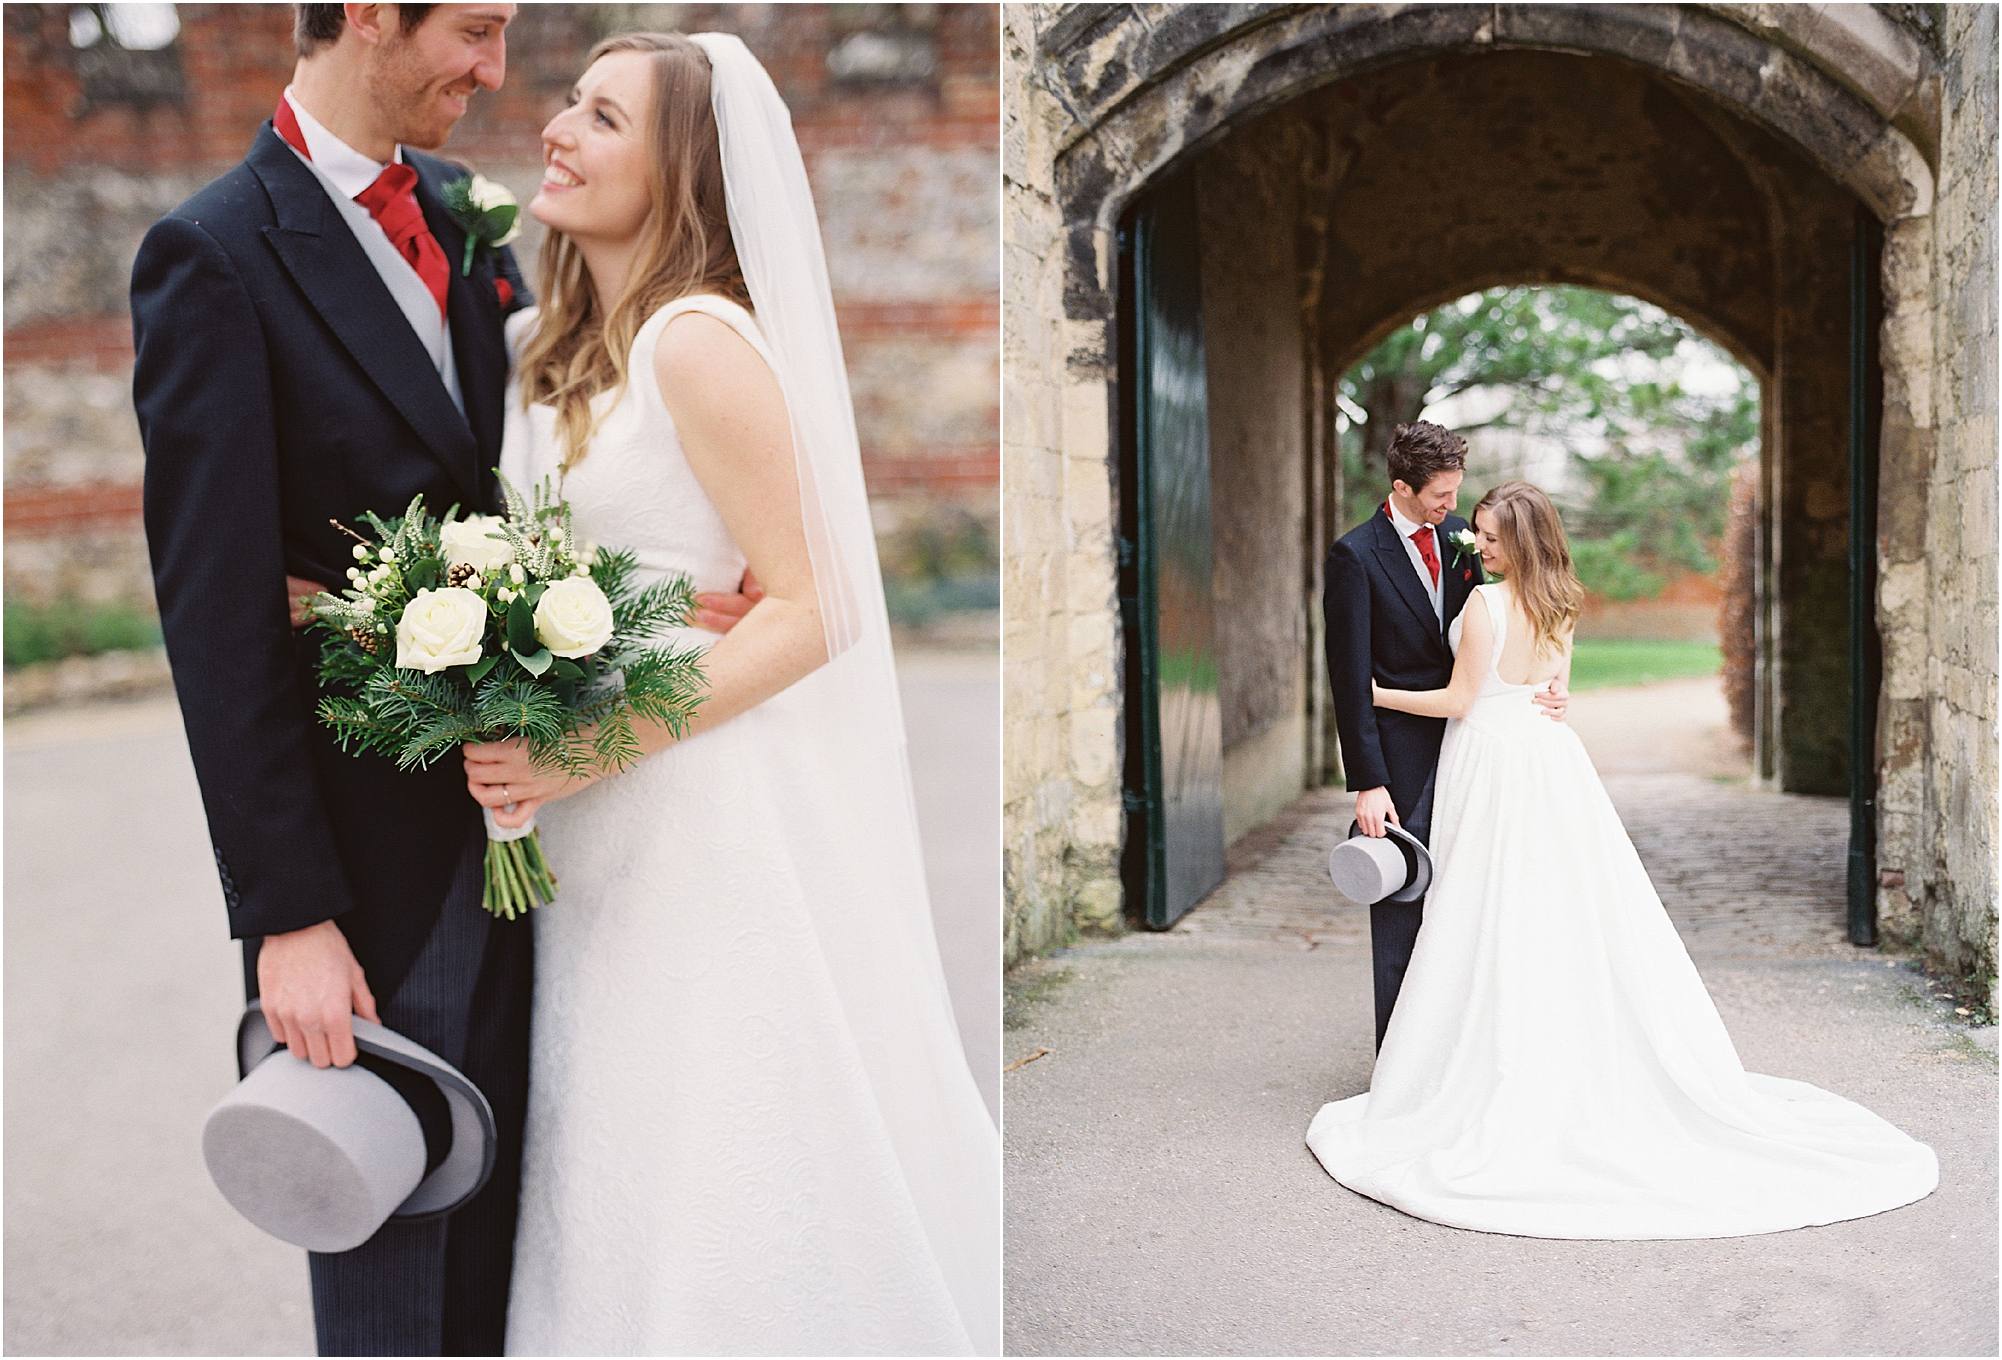 Bride and groom sharing a first look before wedding ceremony in Chichester Cathedral